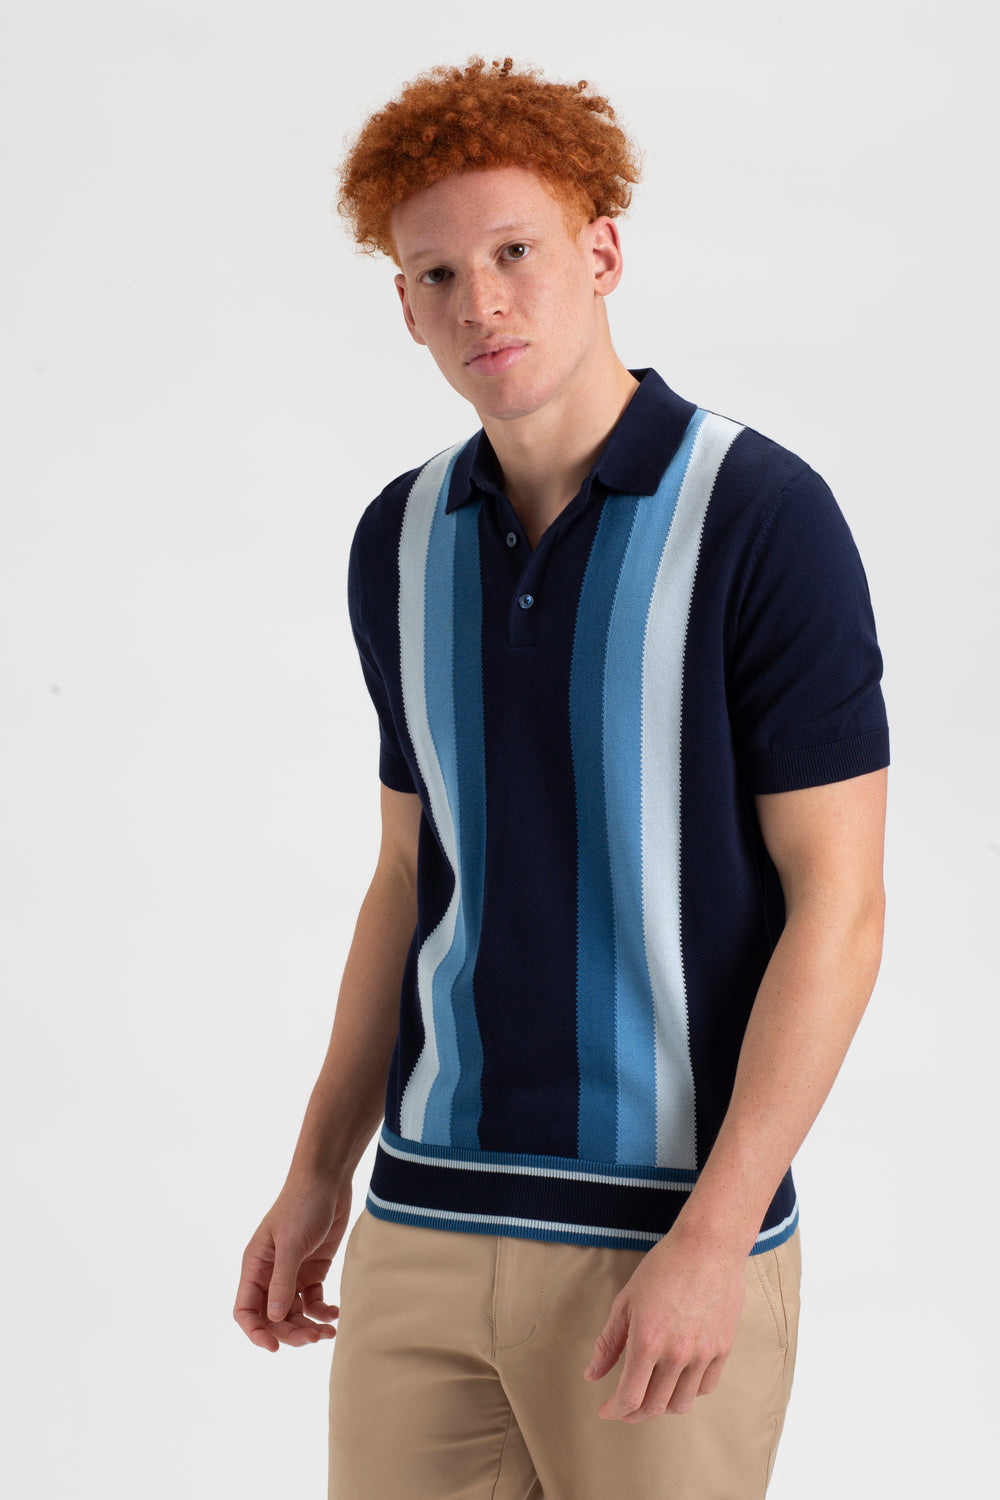 Iconic Gradient Vertical Stripe Mod Knit Polo